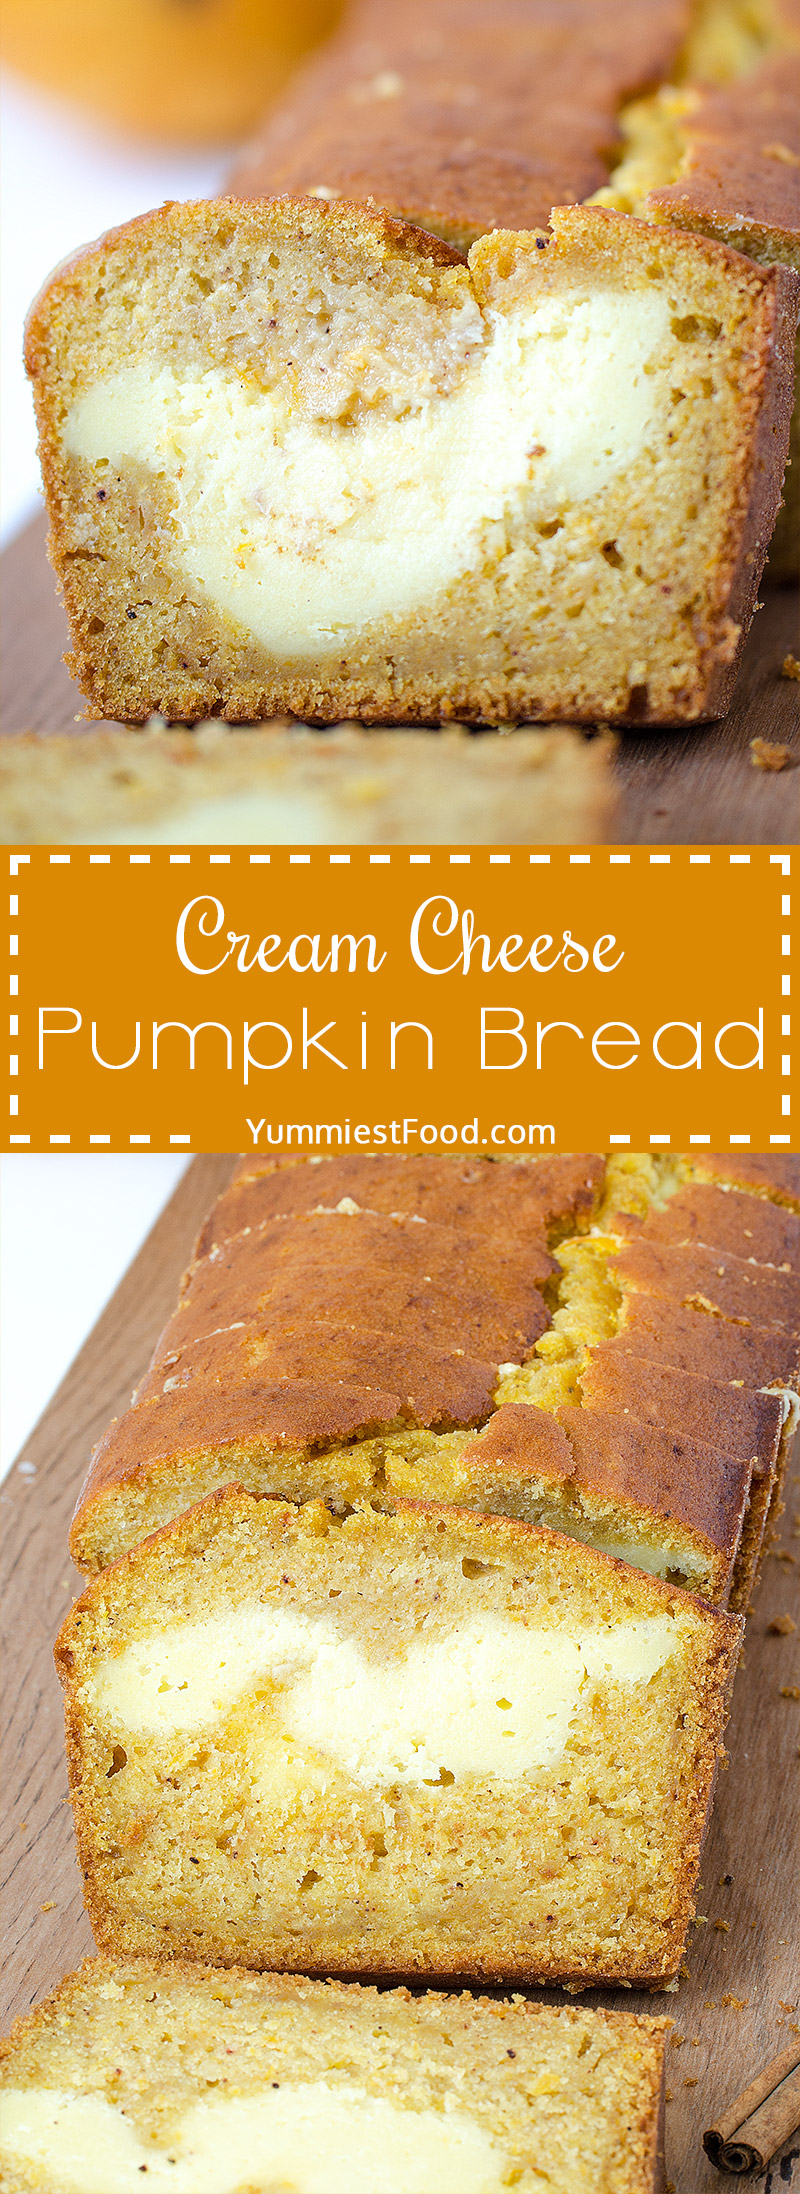 Cream Cheese Pumpkin Bread - ideal combination of cheese, cinnamon and only few ingredients